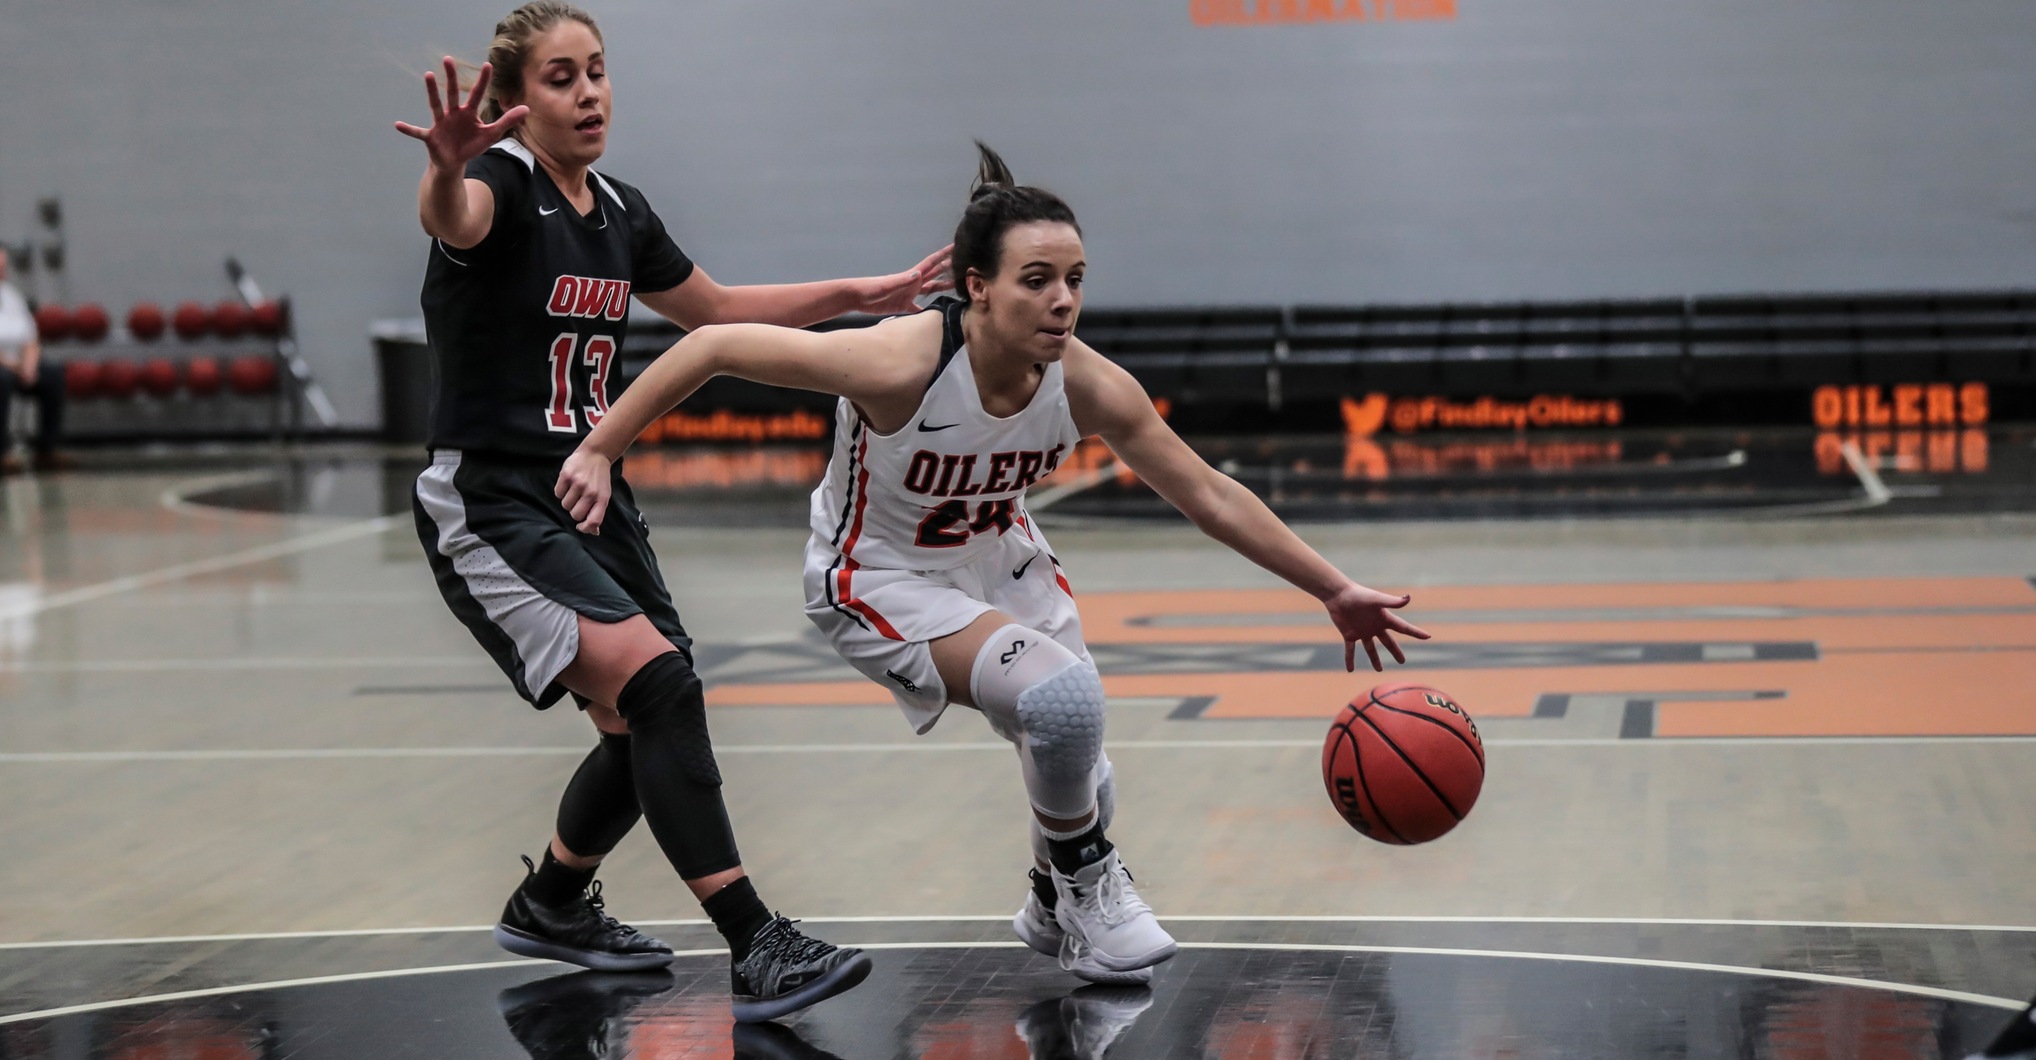 Oilers Open Up League Play on the Road at Tiffin/Cedarville